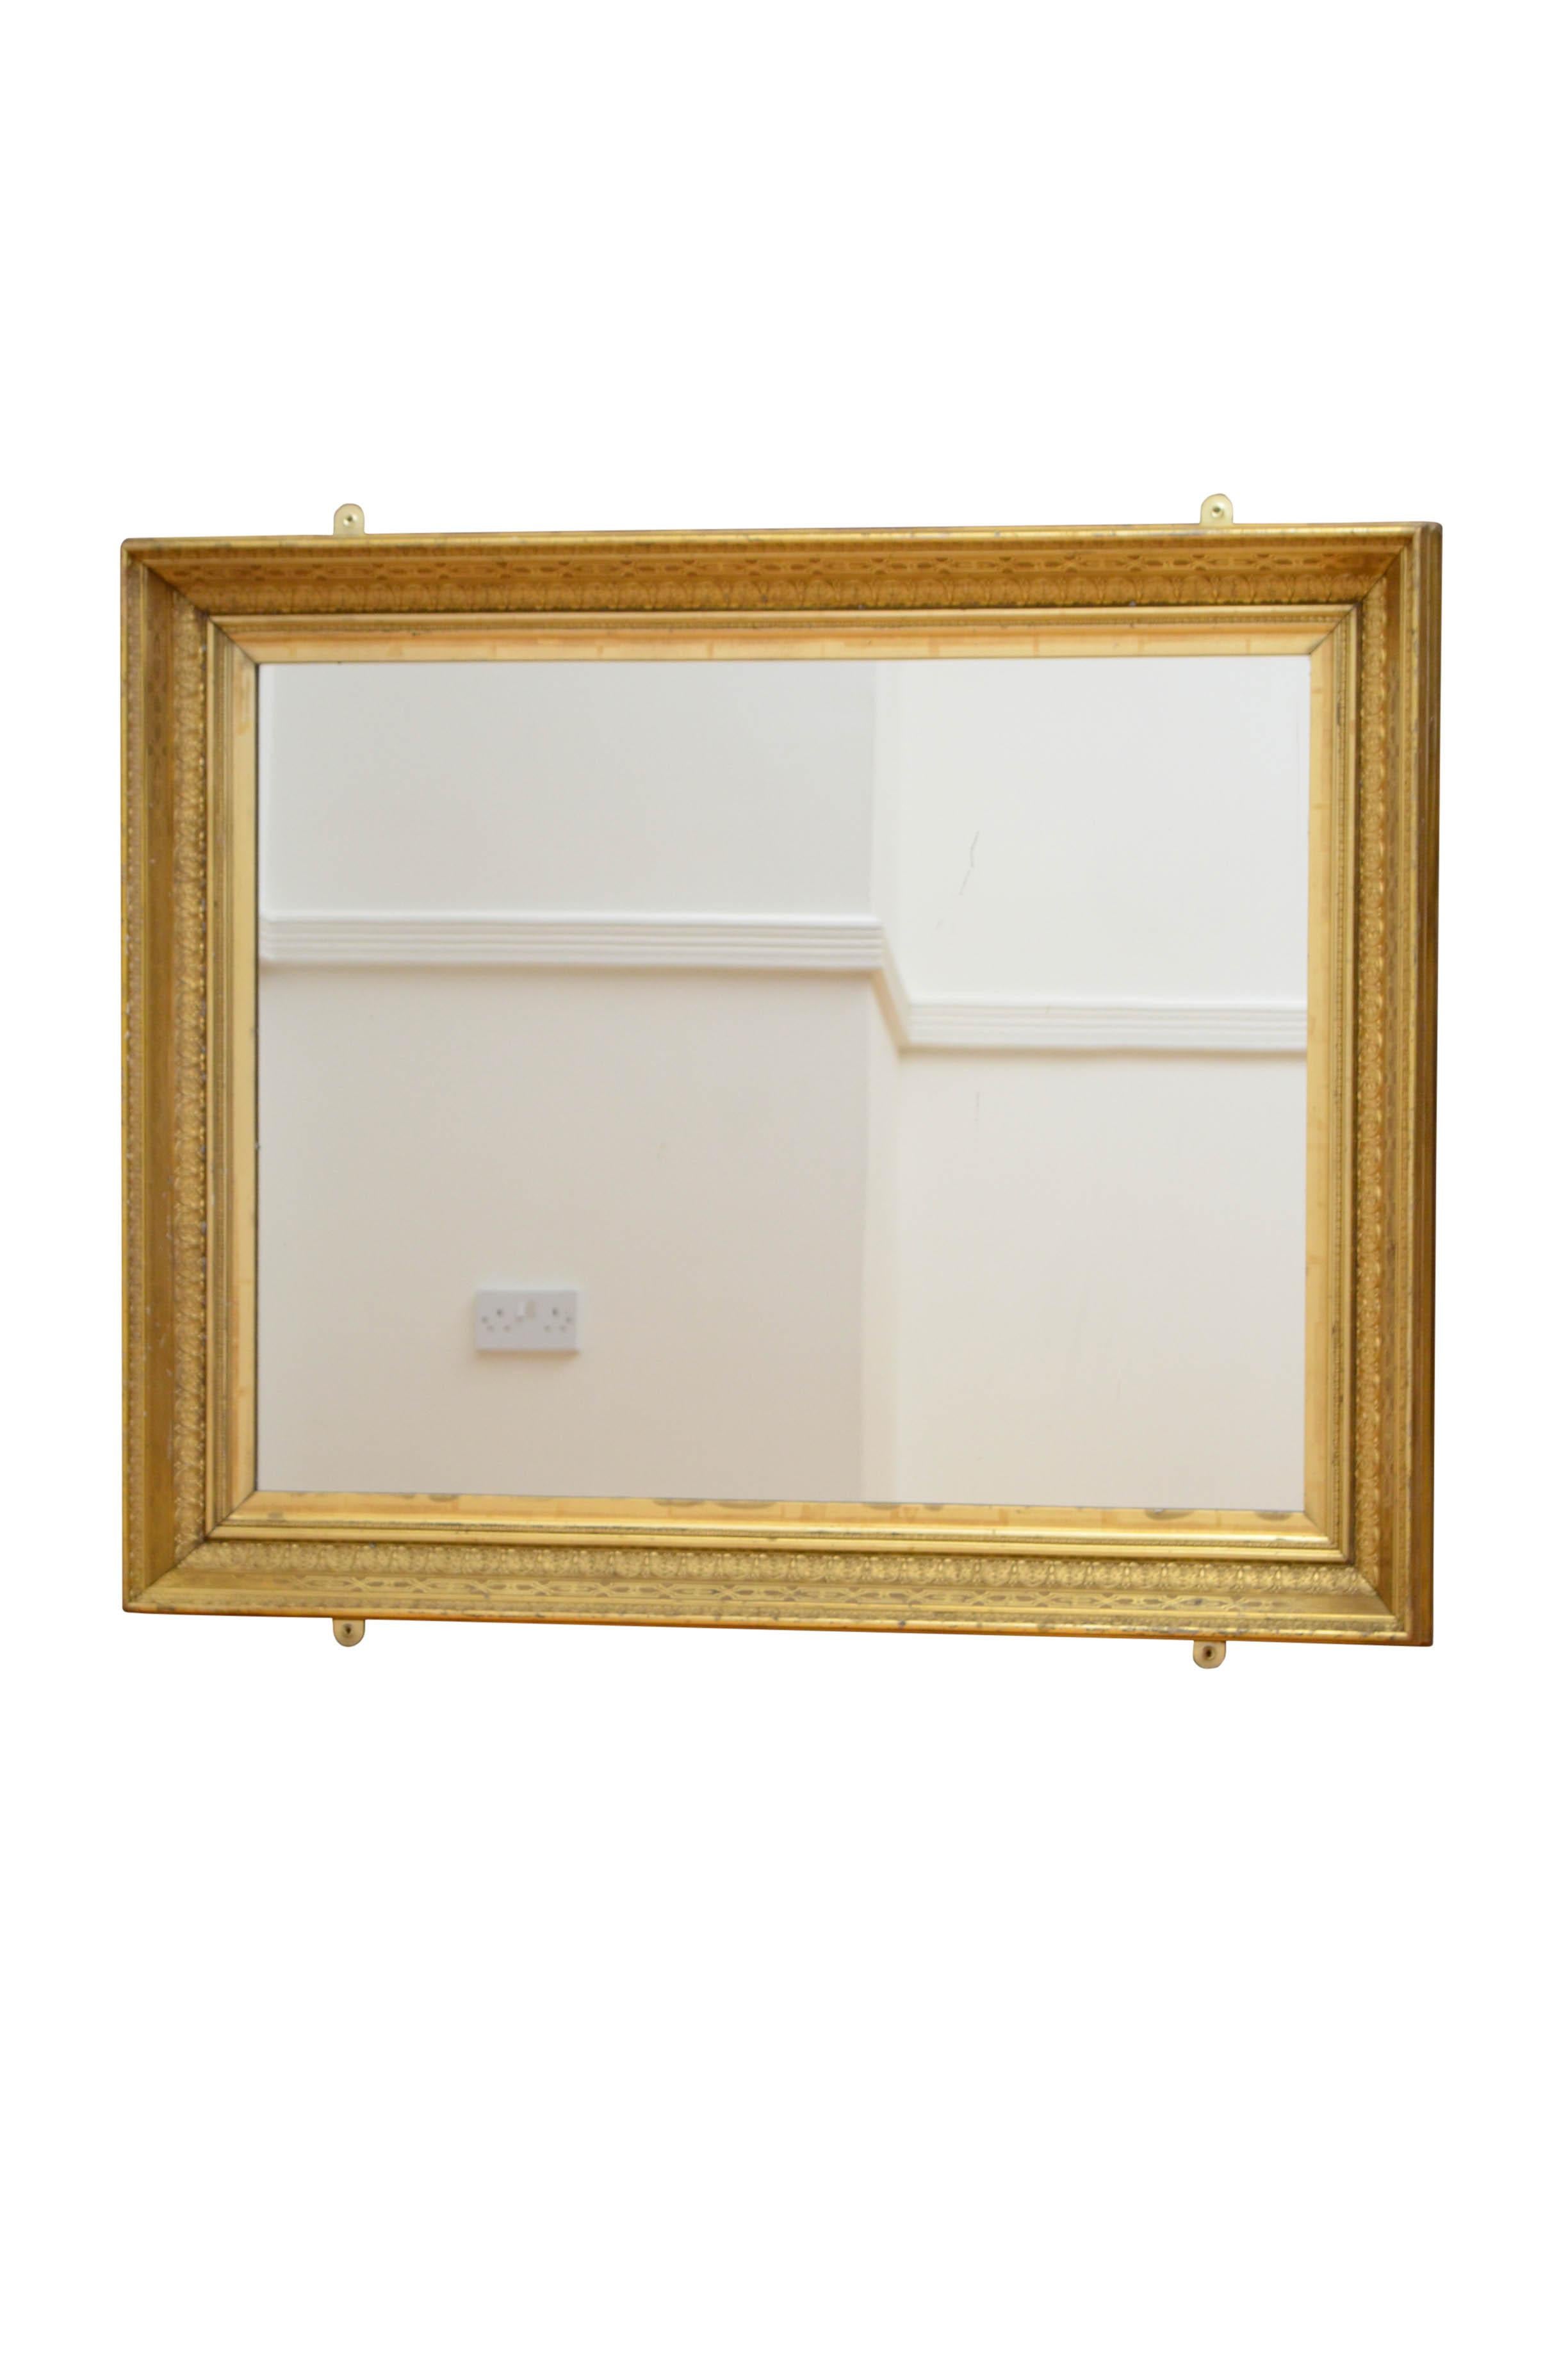 Superb 19th century giltwood wall mirror of versatile form, can be positioned horizontally or vertically, having replacement glass in beautifully carved and moulded gilded frame. This antique mirror retains its original gilt throughout, all in